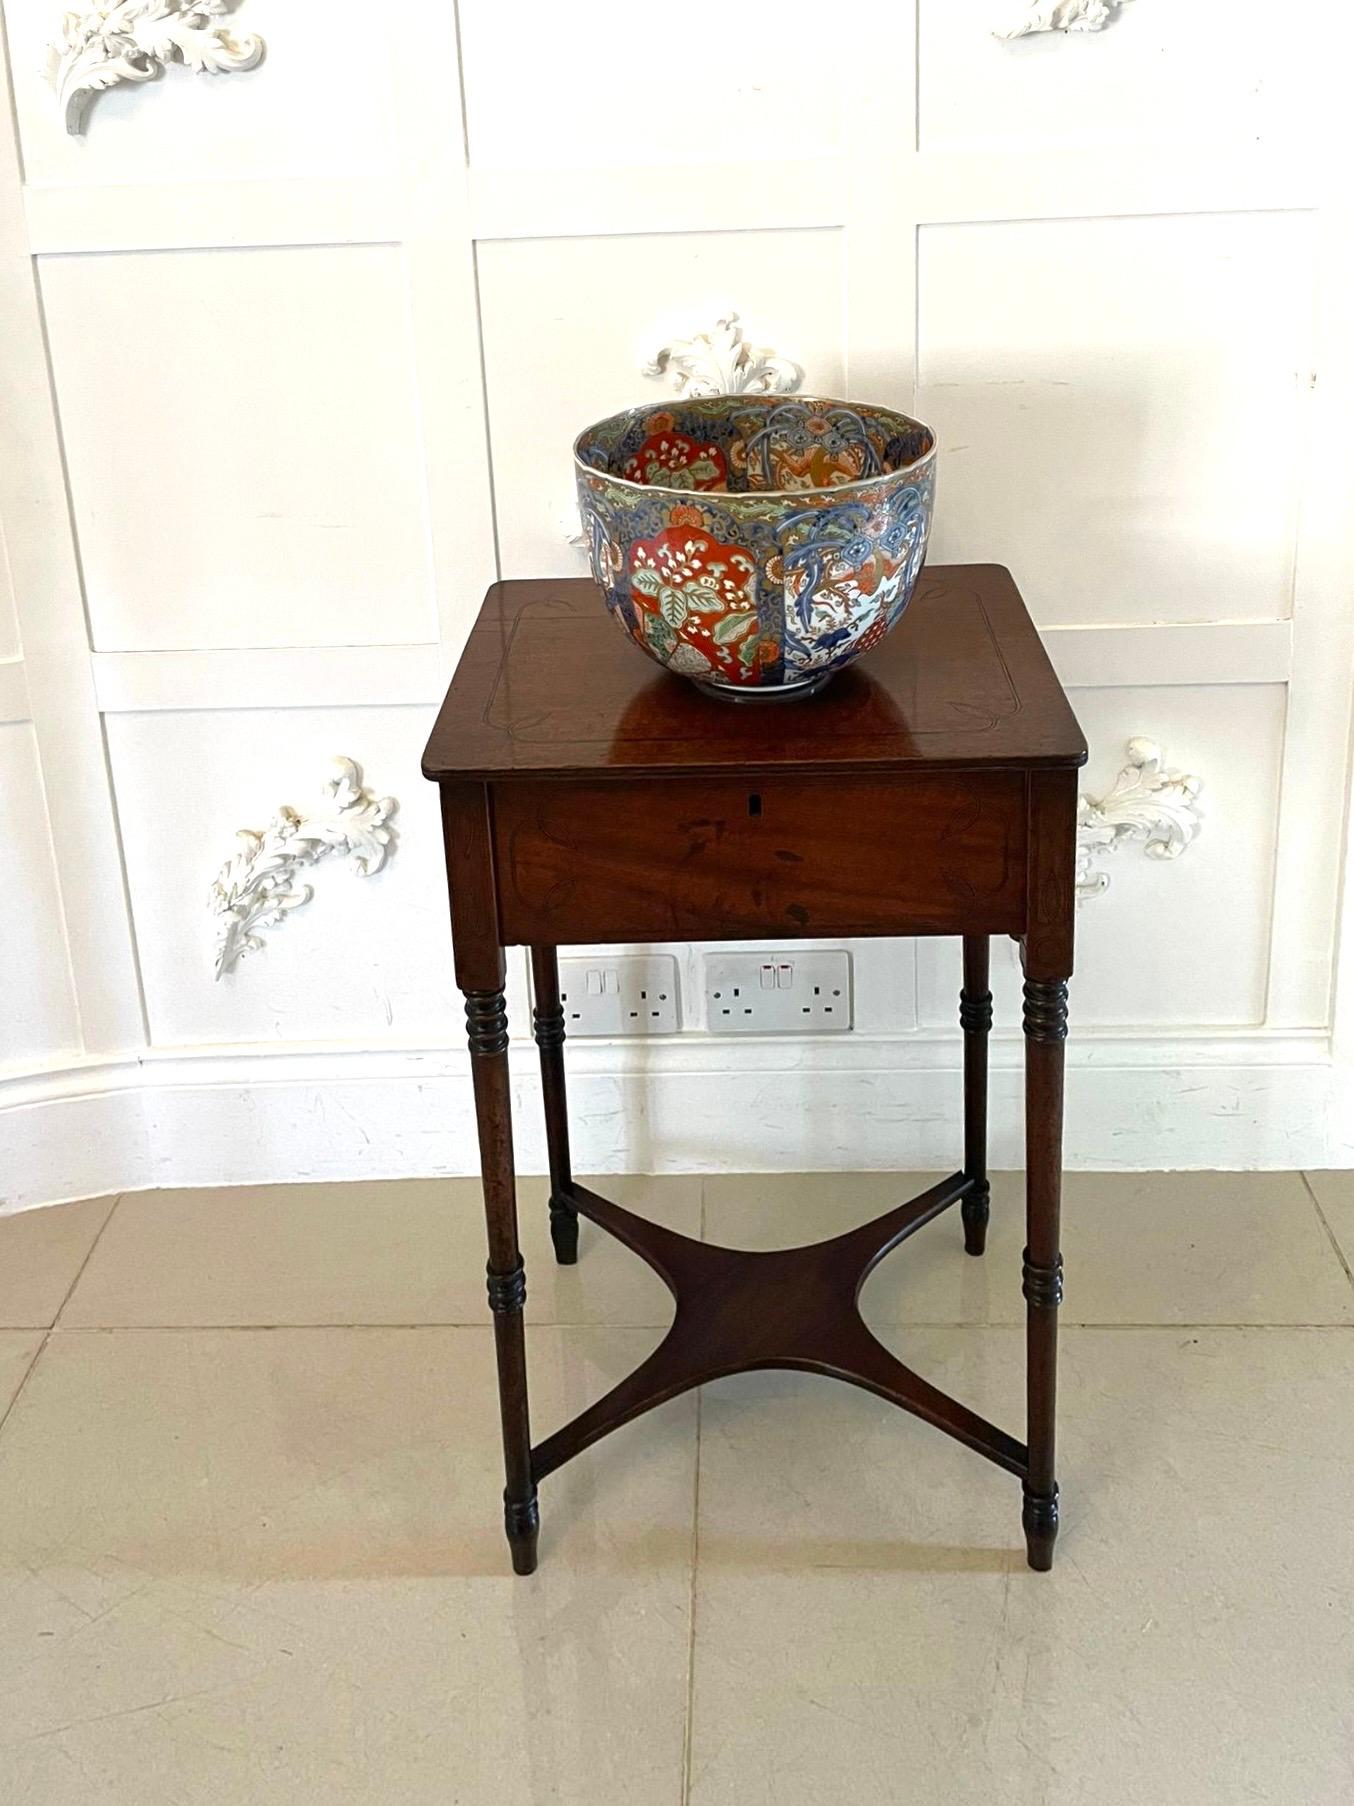 Antique Regency freestanding quality mahogany inlaid lamp table having a quality mahogany inlaid lift top with a reeded edge opening to reveal a storage compartment, inlaid mahogany frieze standing on elegant turned tapering legs with turned feet